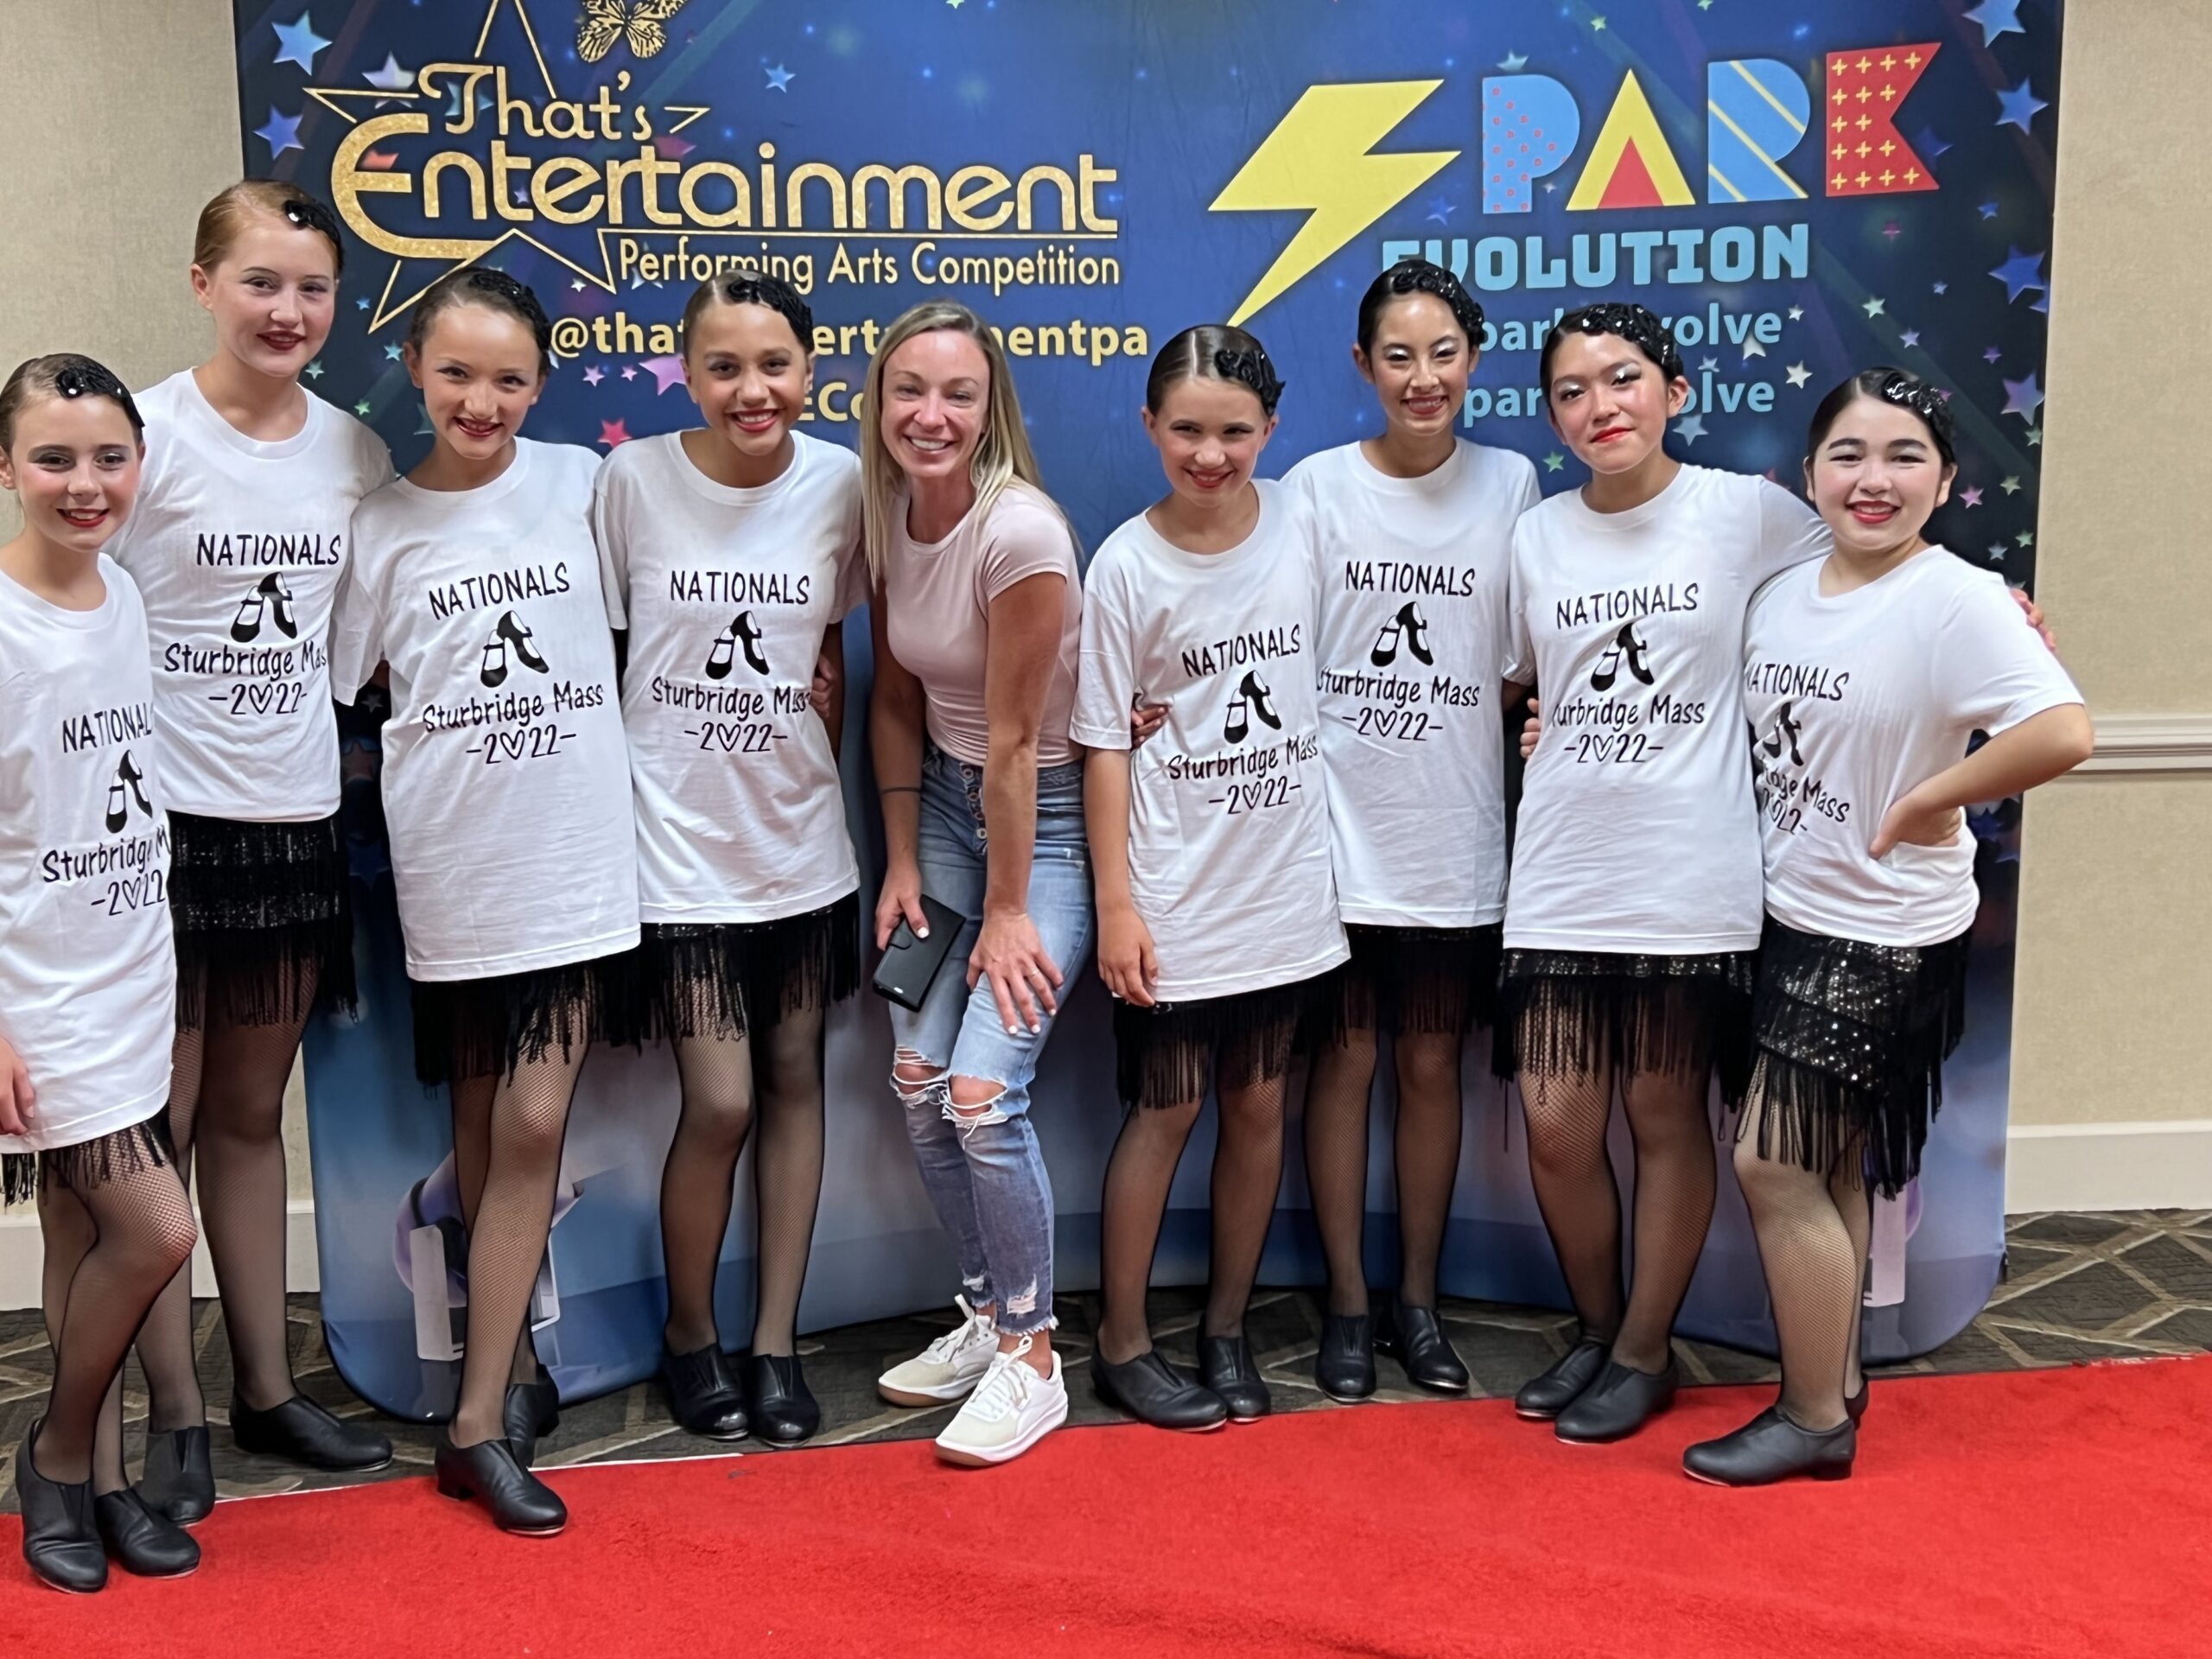 Our Lady of the Hamptons School's tap team traveled to Sturbridge, Massachusetts, in July for a national competition. The team, under the direction of Elyse Curro, took home a first place, as well as four other awards. The team members are, from left,  Olivia Caruso, Olivia Roberston, Estee Phair, Ruby Boeding, coach Curro, Grace Gonzalez, Julia Dell'Aquila, Scarlett Rose Macias and Maeve Springer. COURTESY NATASHA PHAIR